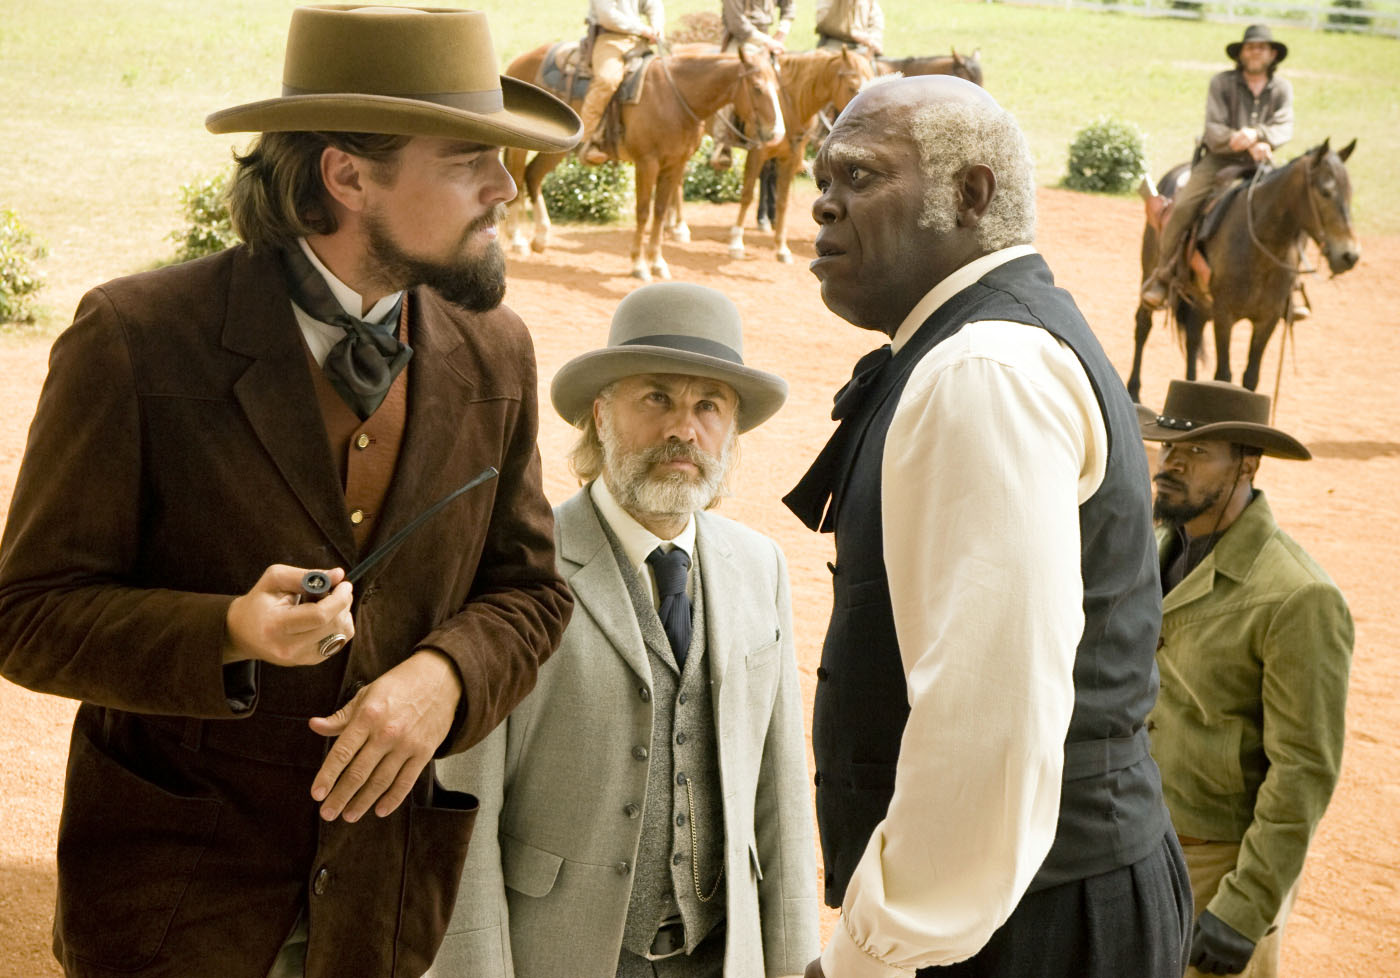 new-images-of-leonardo-dicaprio-in-django-unchained-and-with-jean